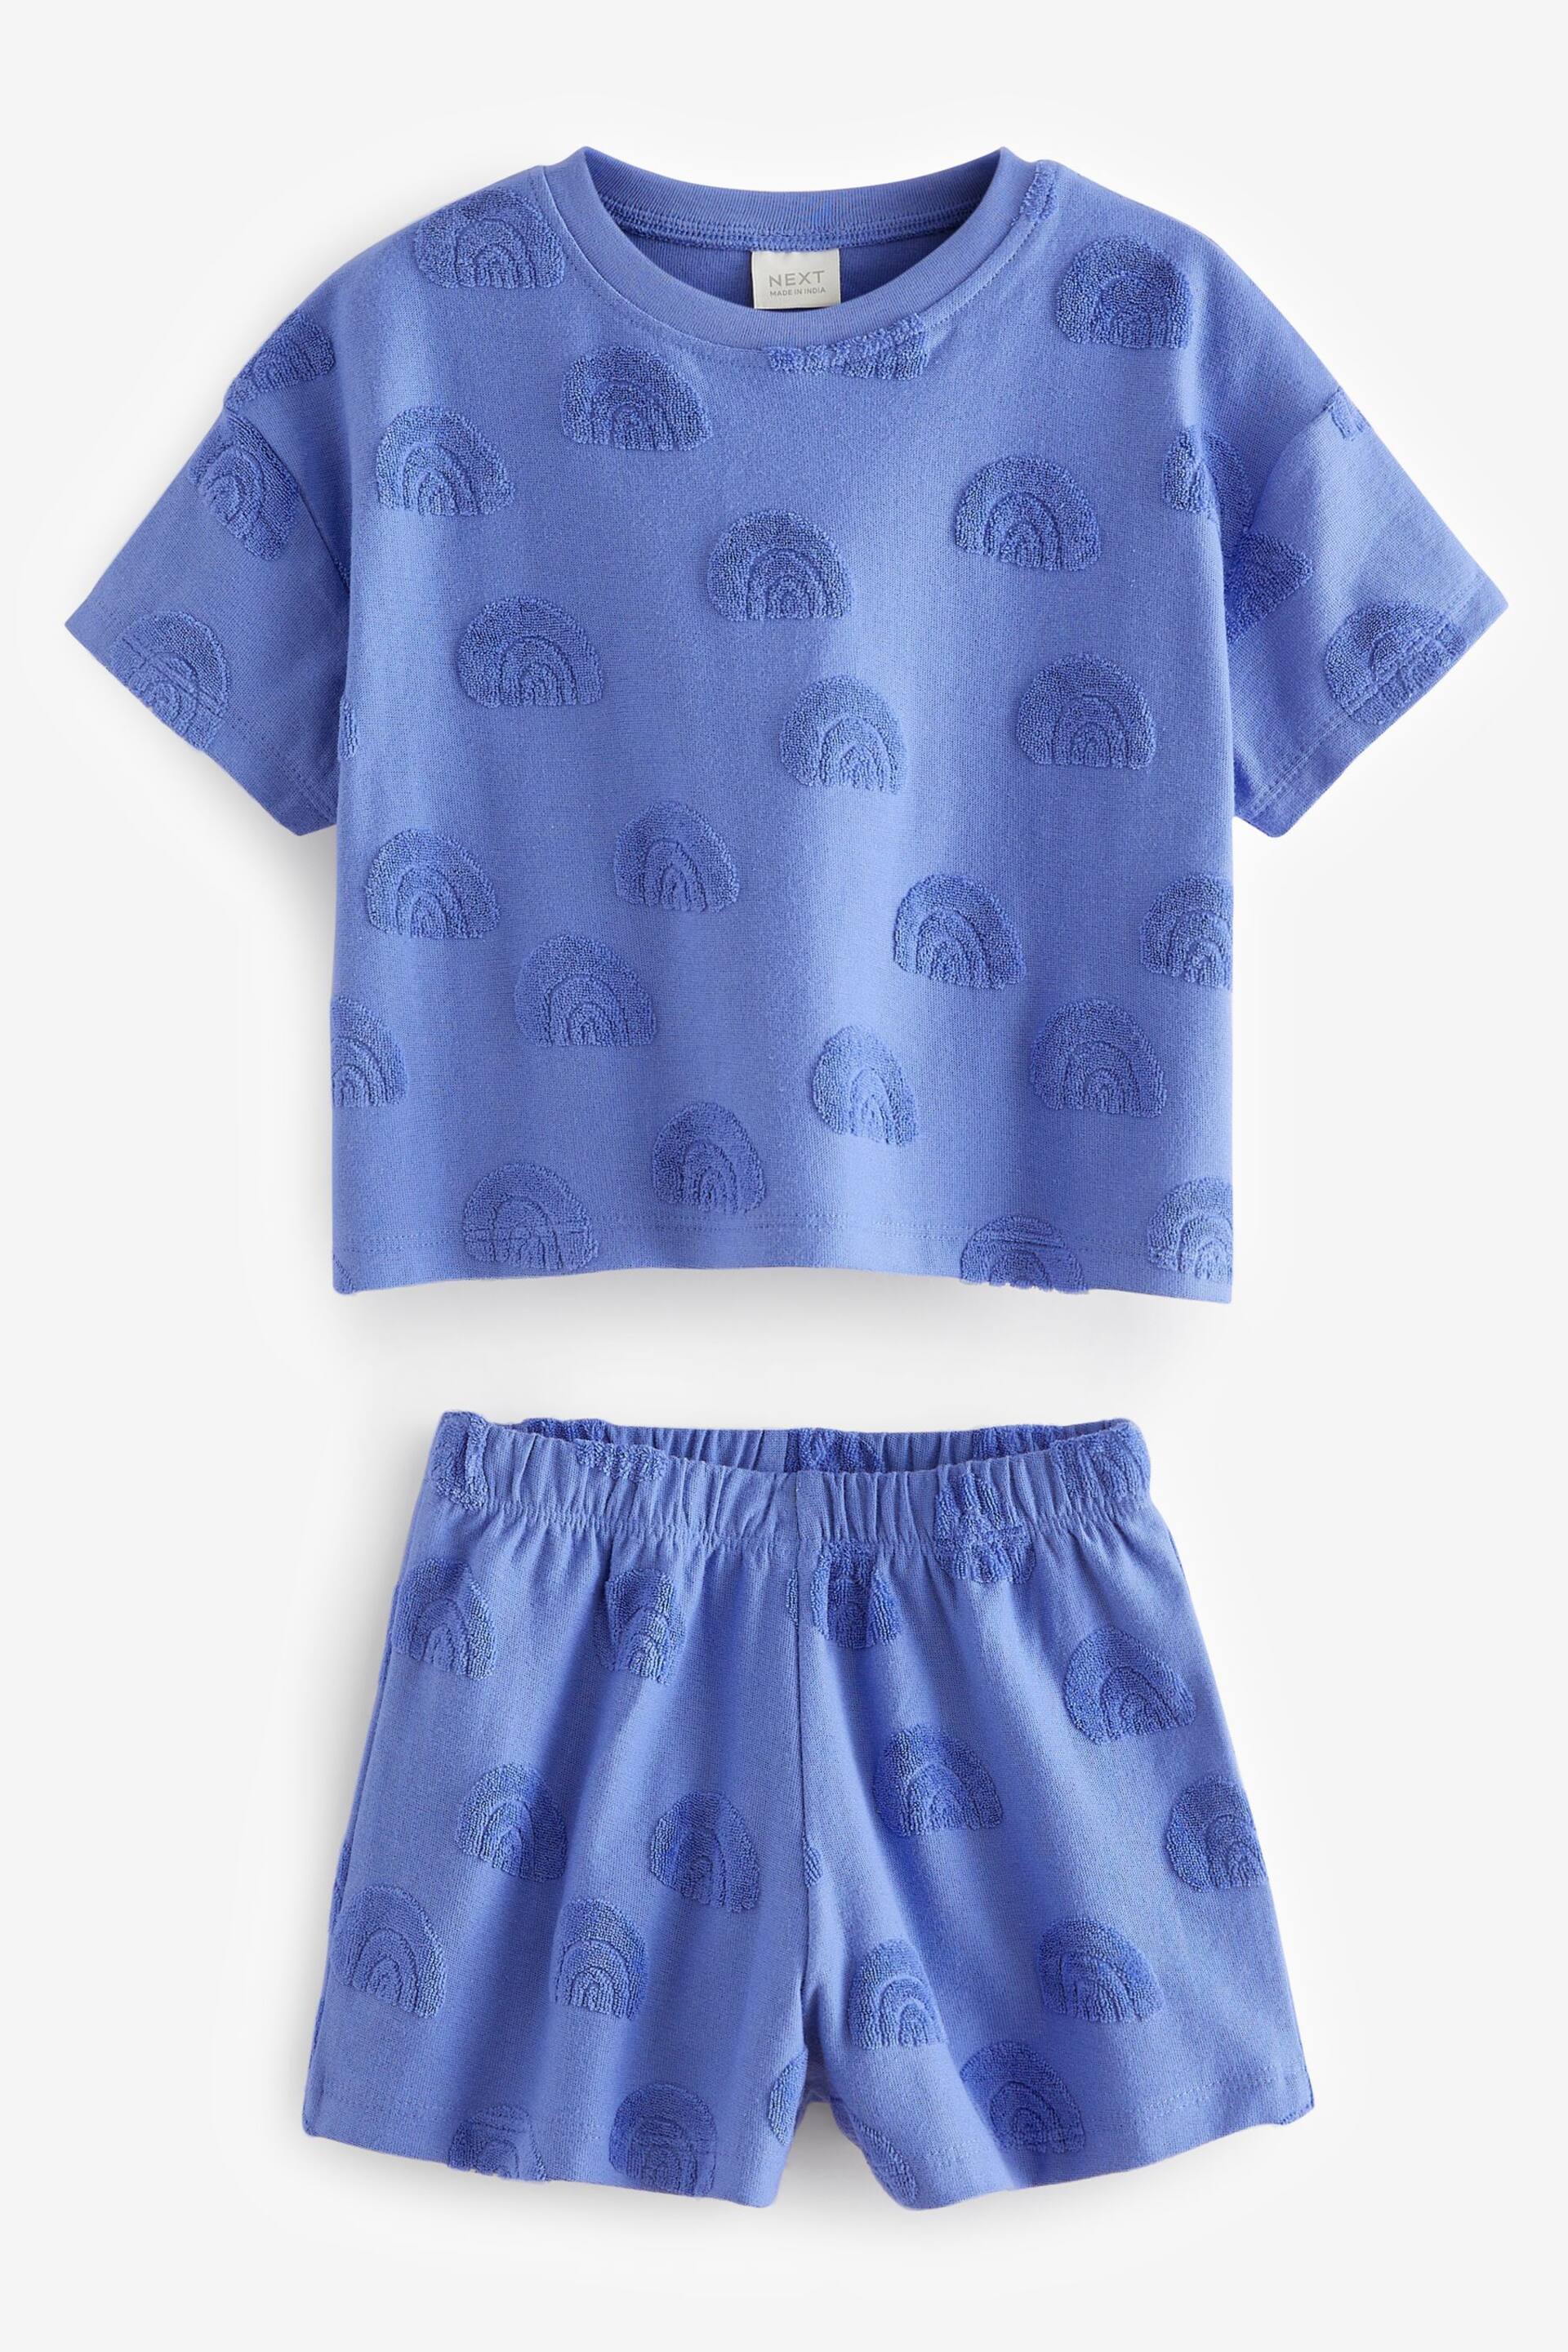 Blue Rainbow Towelling Short Sleeve Top and Shorts Set (3mths-7yrs) - Image 5 of 7